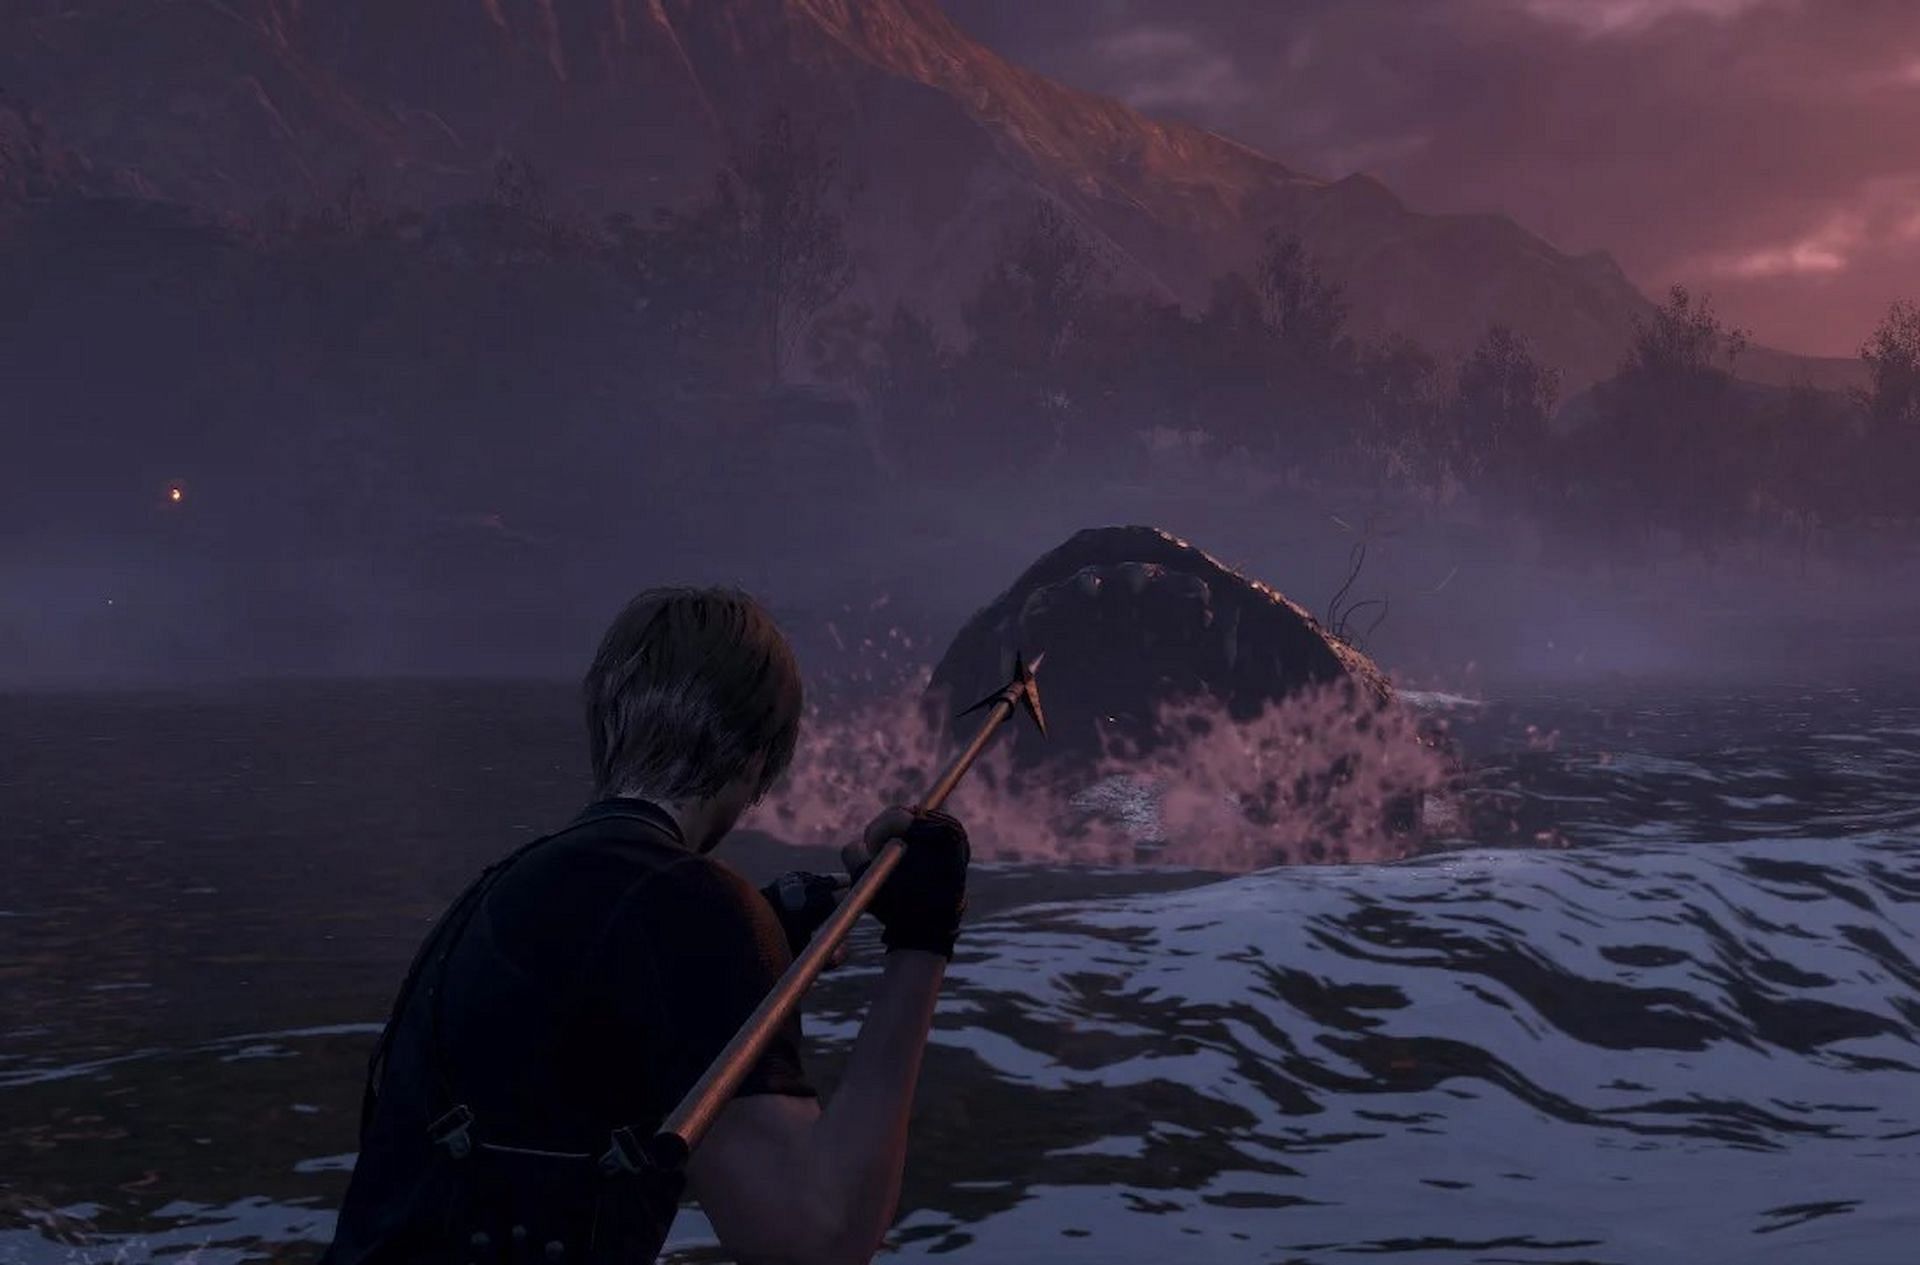 Del Lago lake monster can be defeated using harpoons in Resident Evil 4 remake (Image via Capcom)